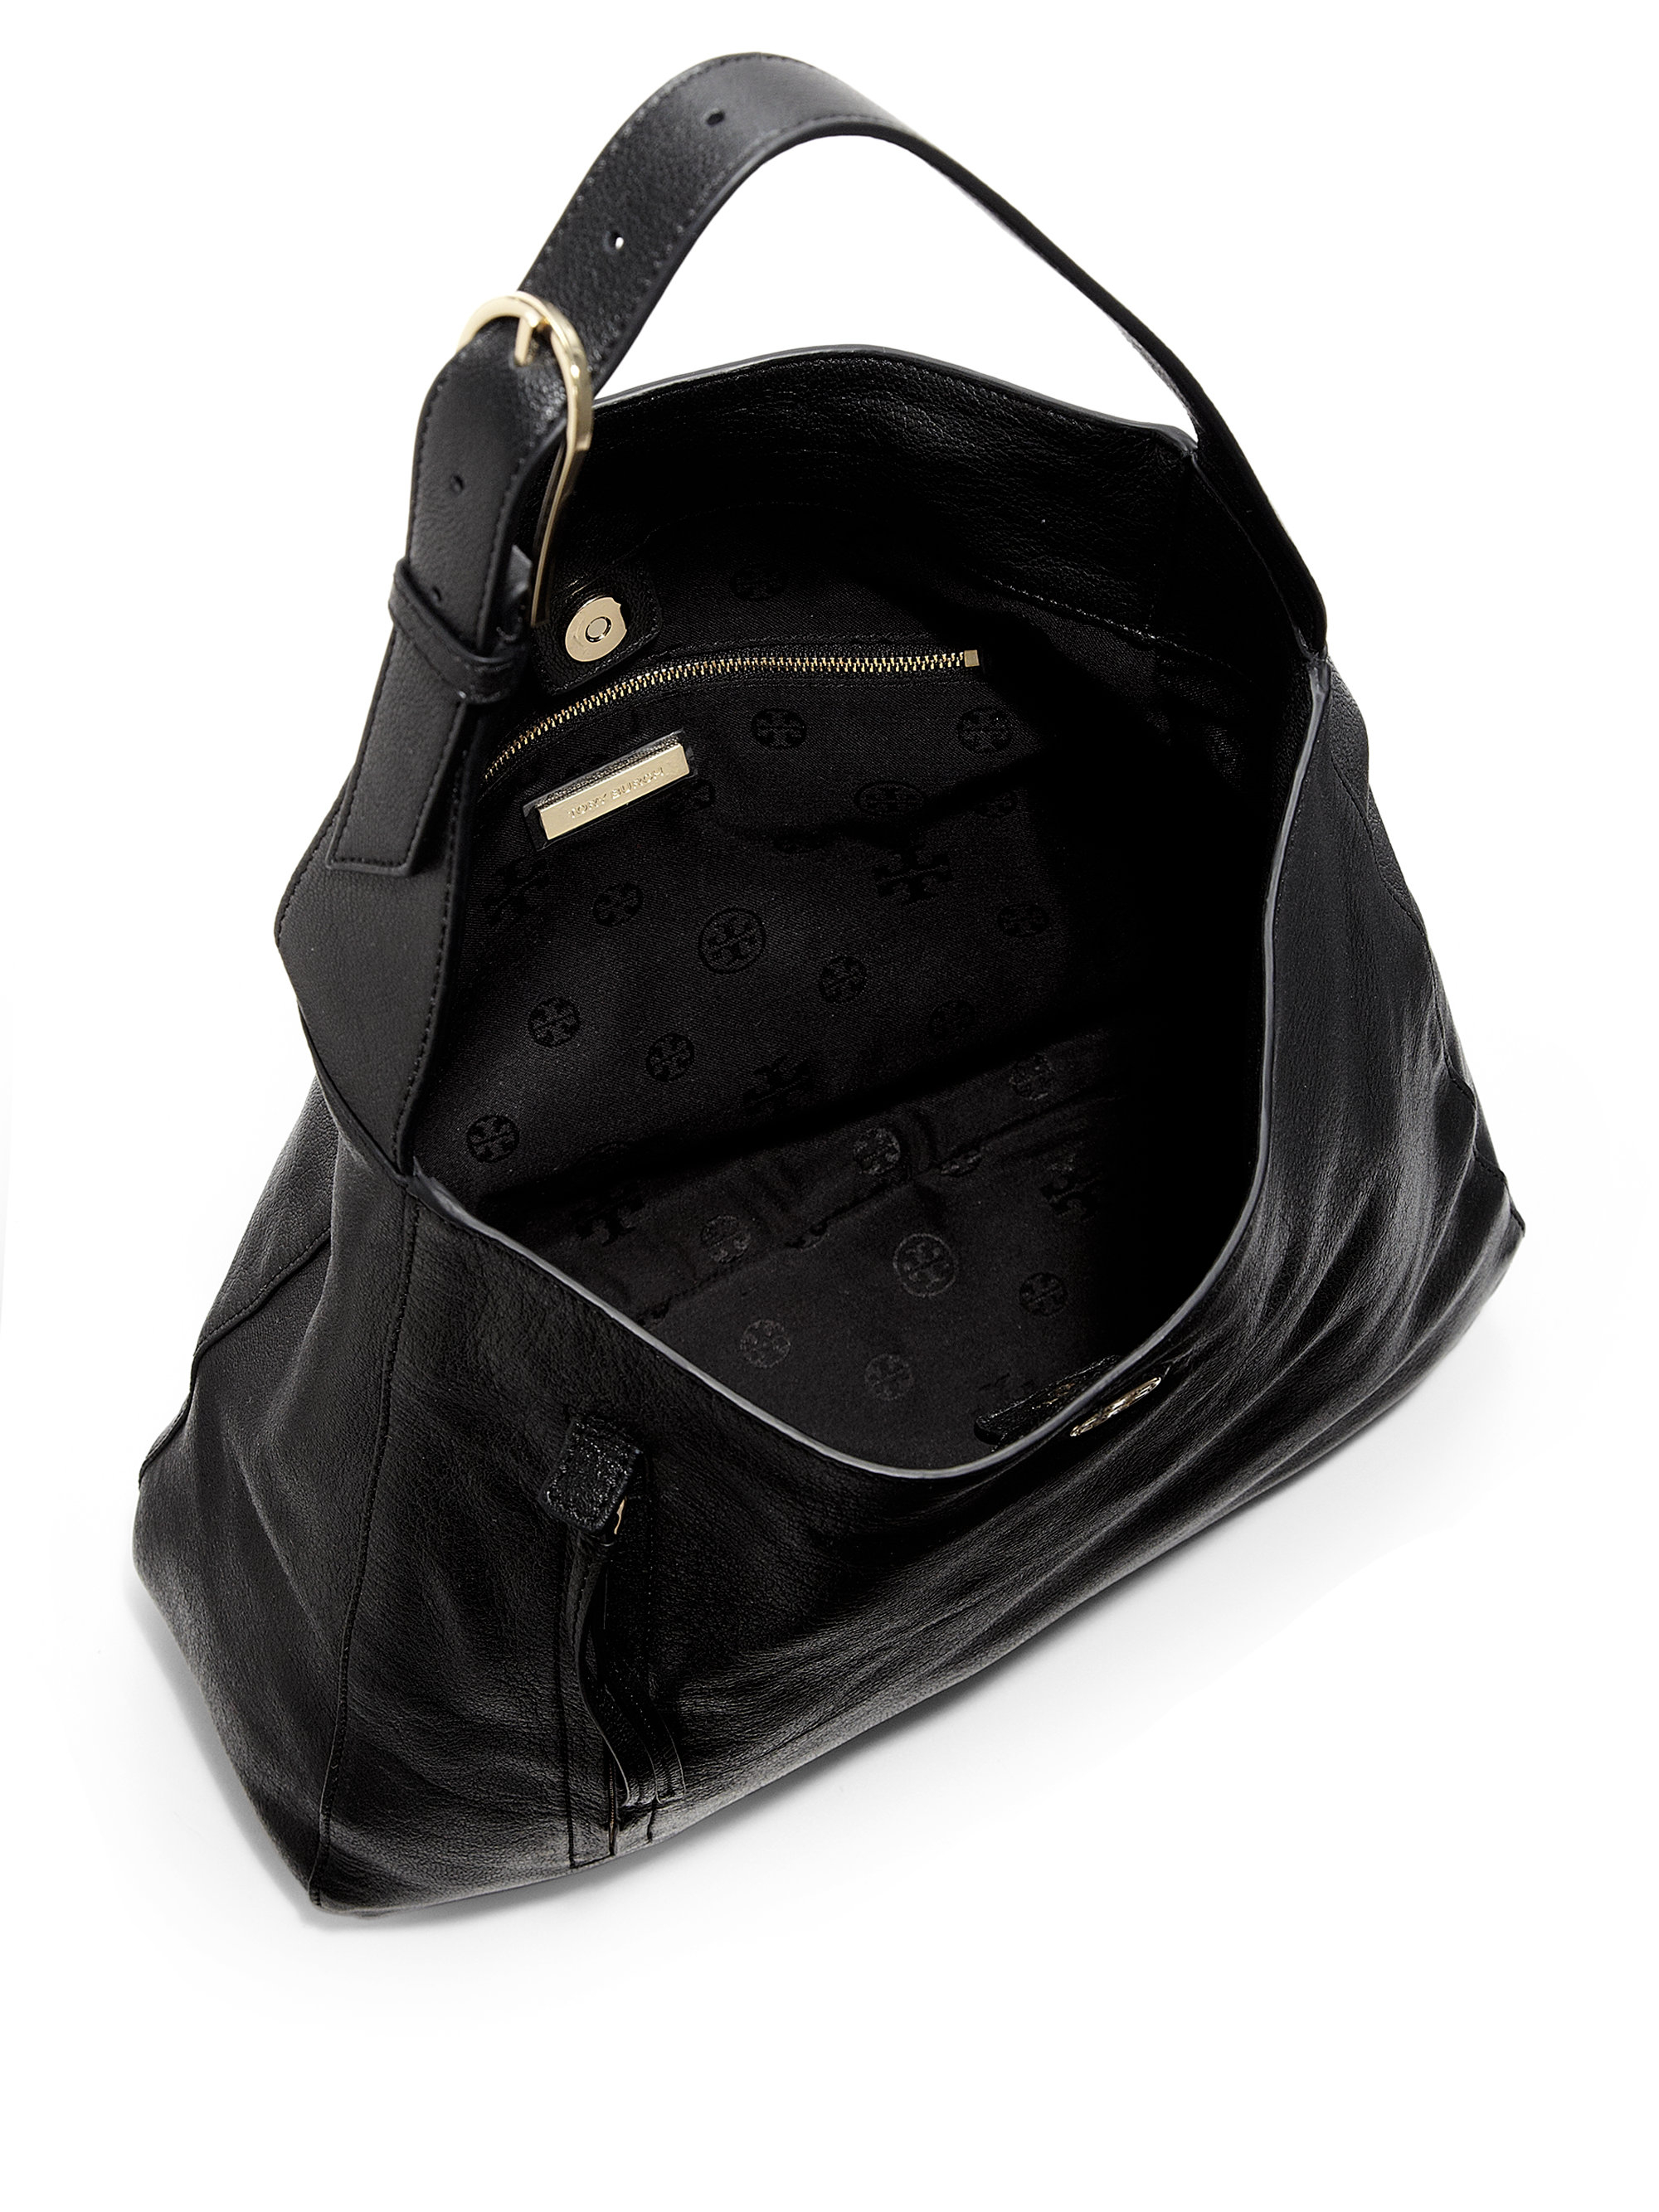 Lyst - Tory Burch Brodie Leather Hobo in Black